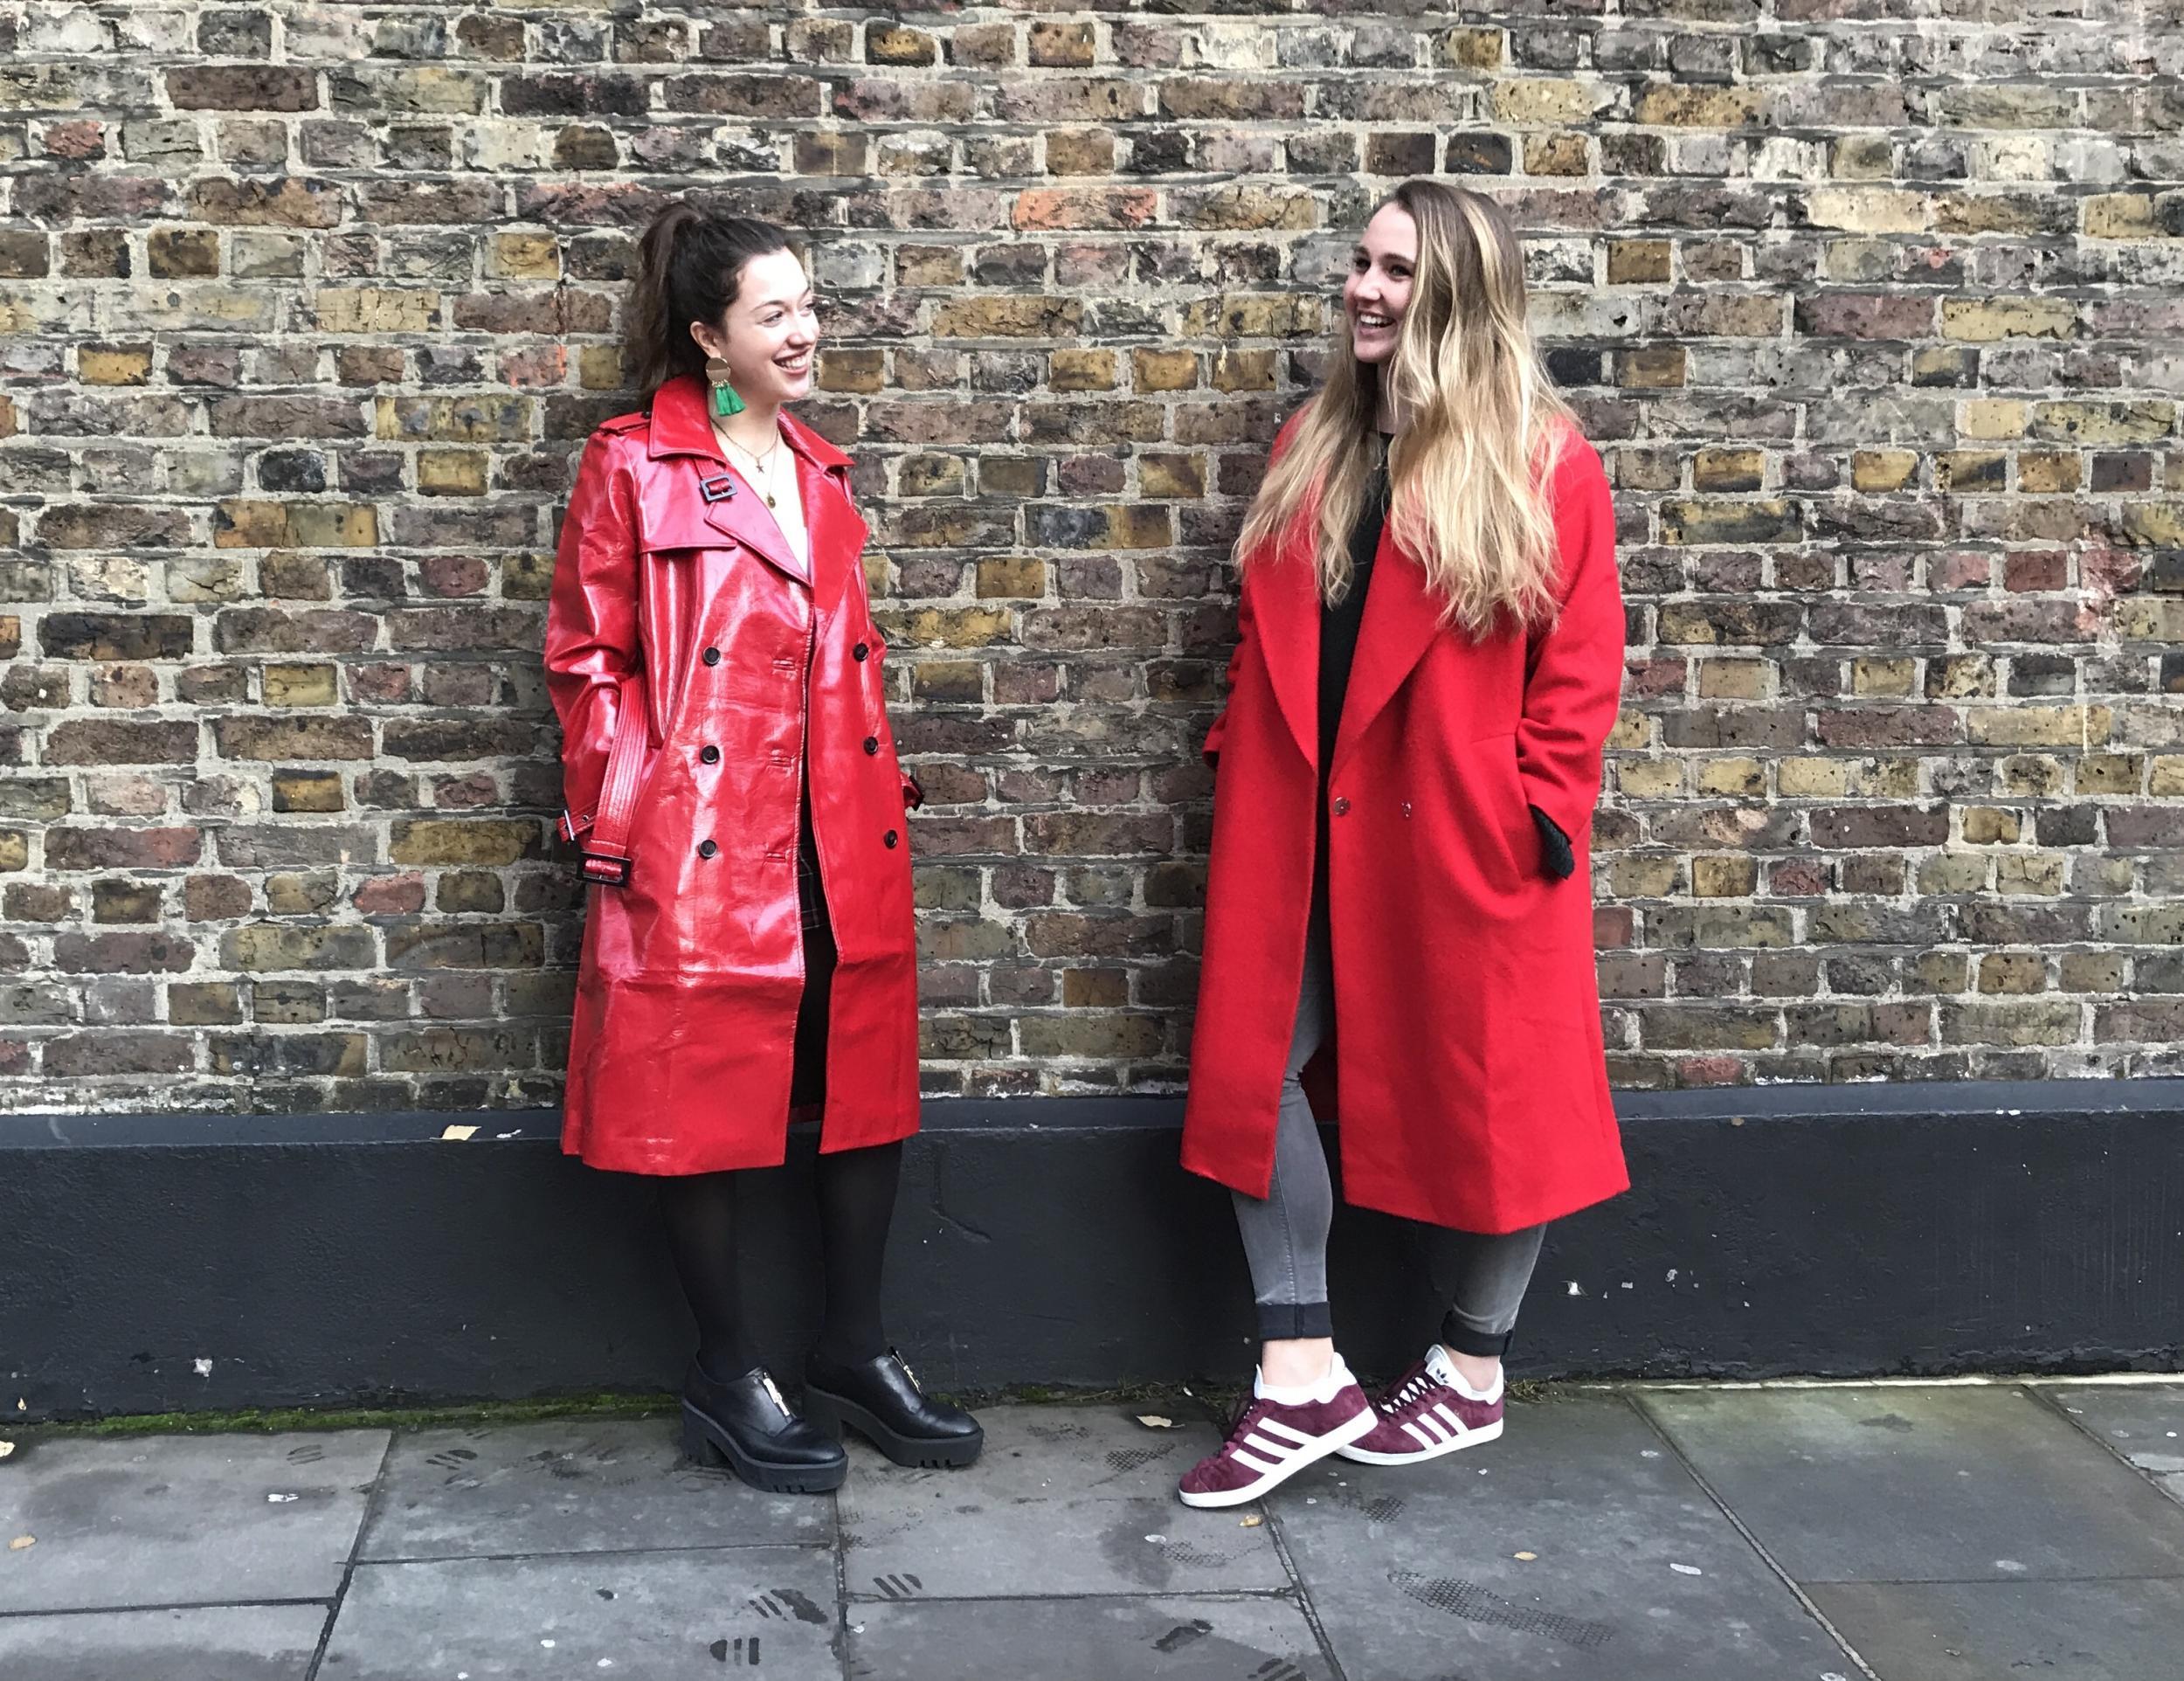 Can a red coat really make you more attractive? We put the theory